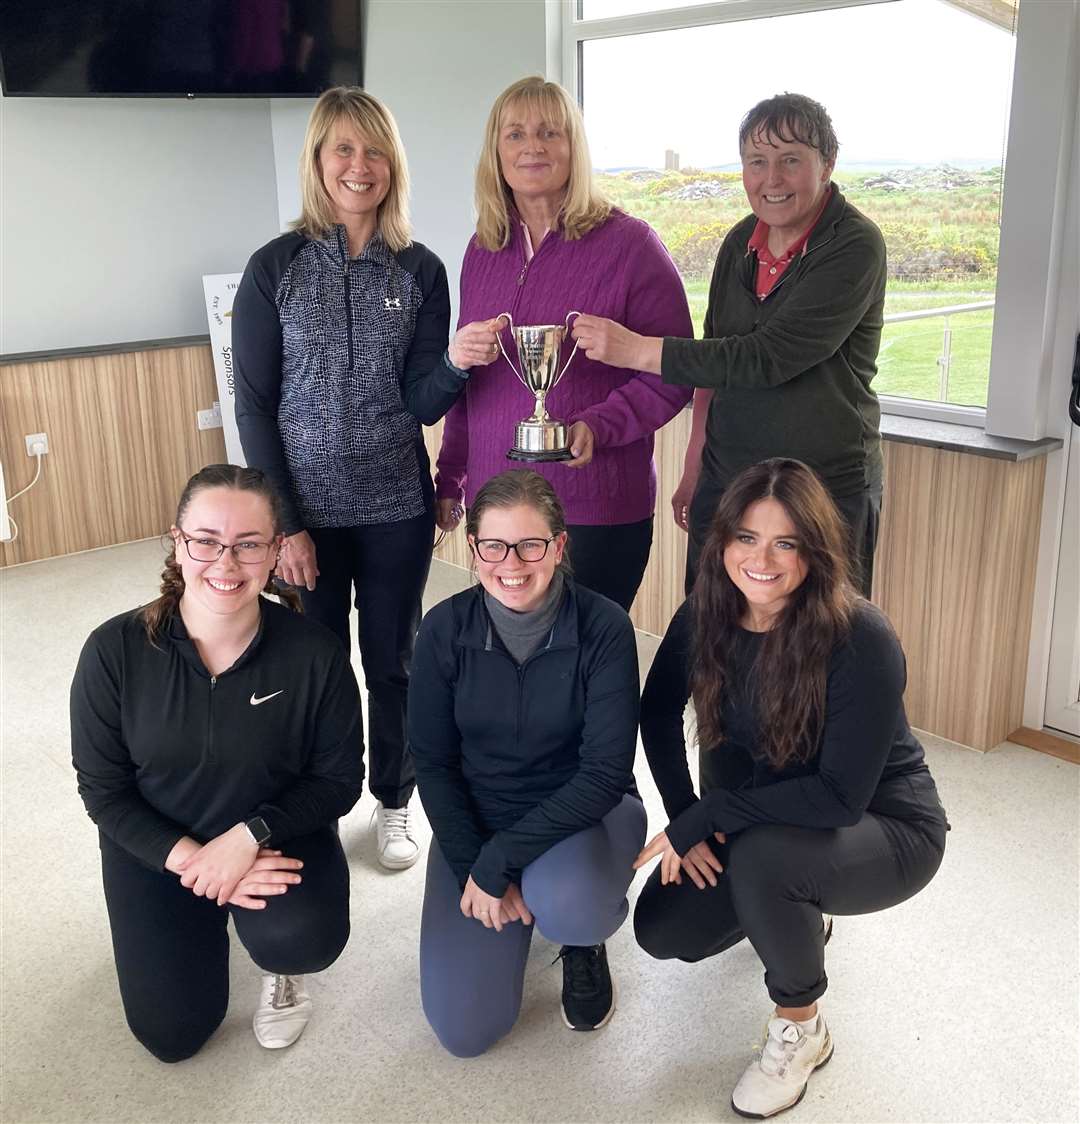 The Reay team who won the Americas Cup matchplay competition at Thurso. Back (from left): Pam Bain, Carol Paterson, Carole Cameron. Front: Sarah Meiklejohn, Rebecca Munro, Eleanor Tunn.